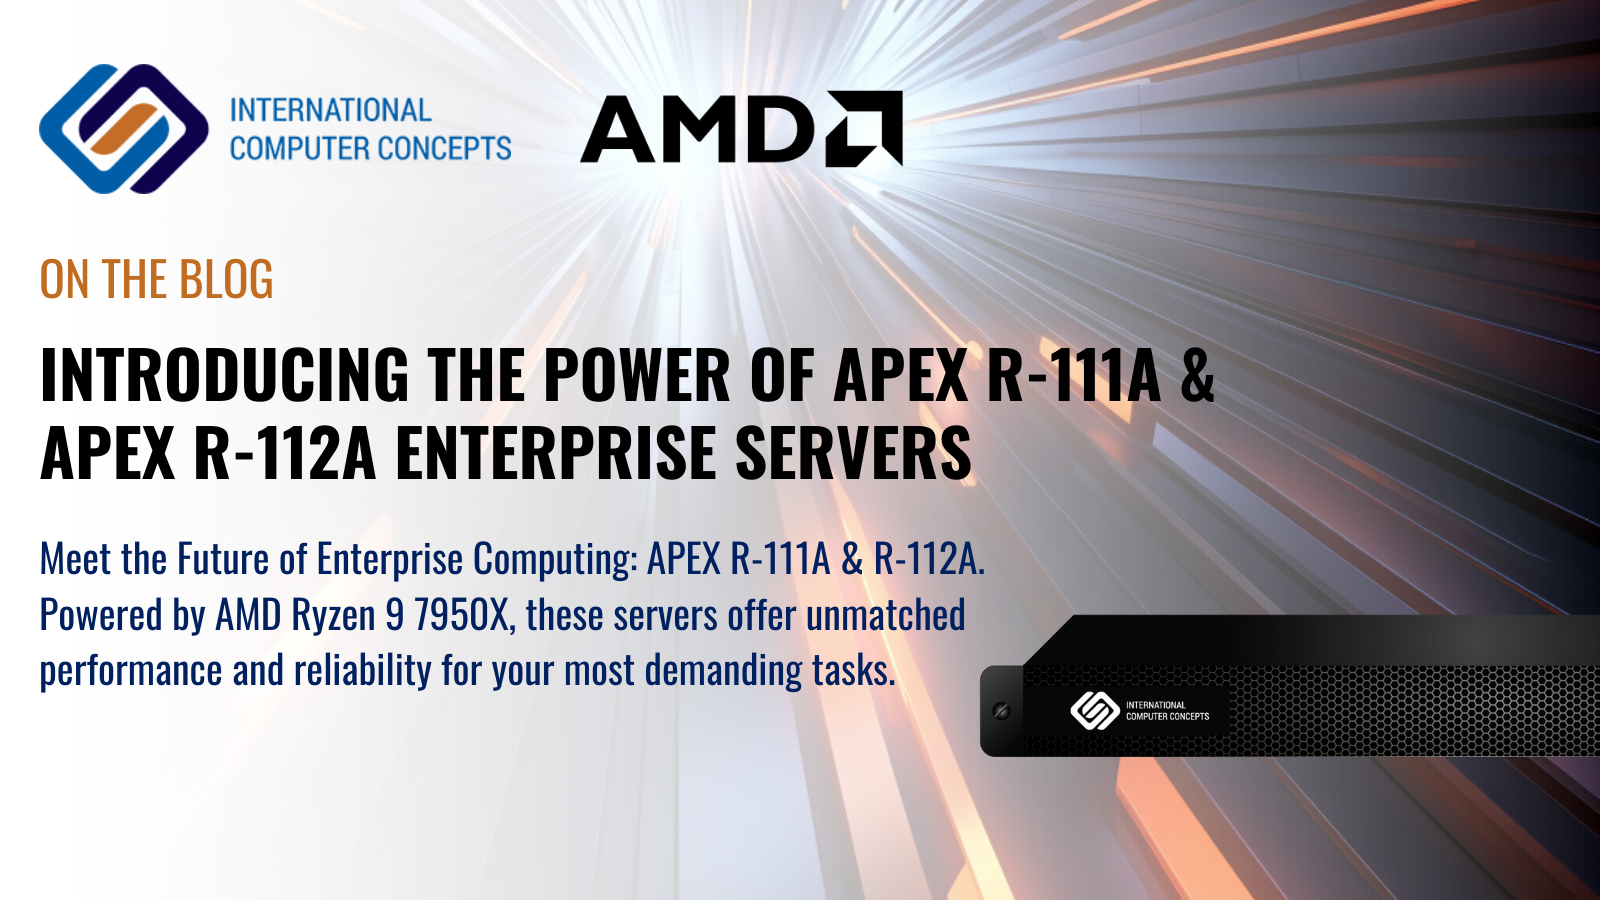  Introducing the Power of APEX R-111A & APEX R-112A Enterprise Servers